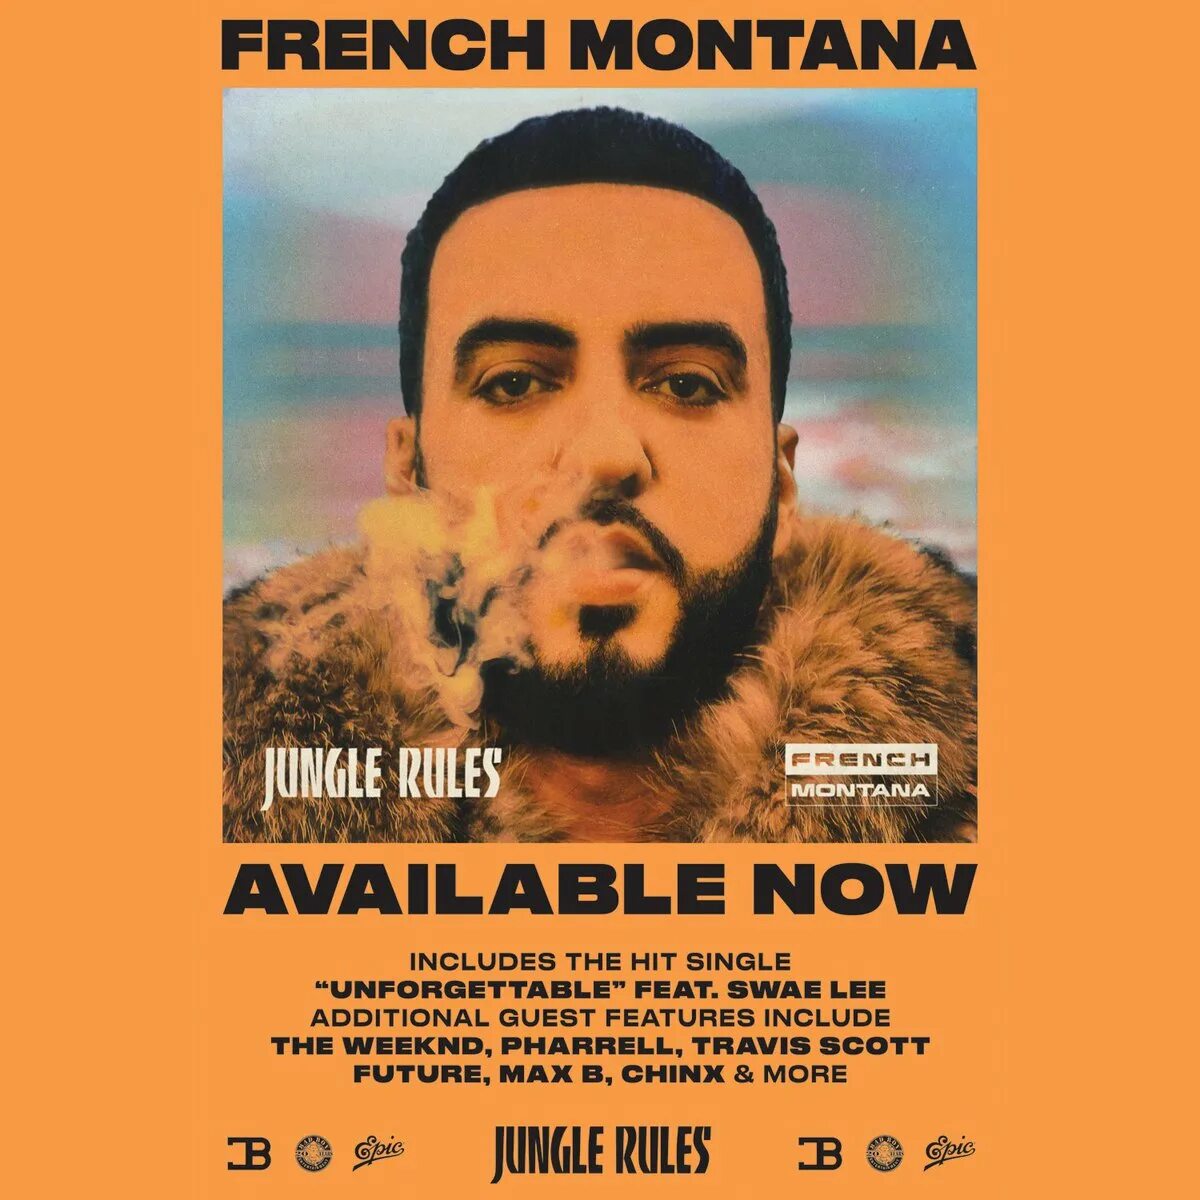 Unforgettable french. French Montana Jungle Rules. Unforgettable French Montana. French Montana Jungle Rules  2017. Обложка French Montana Jungle Rules.